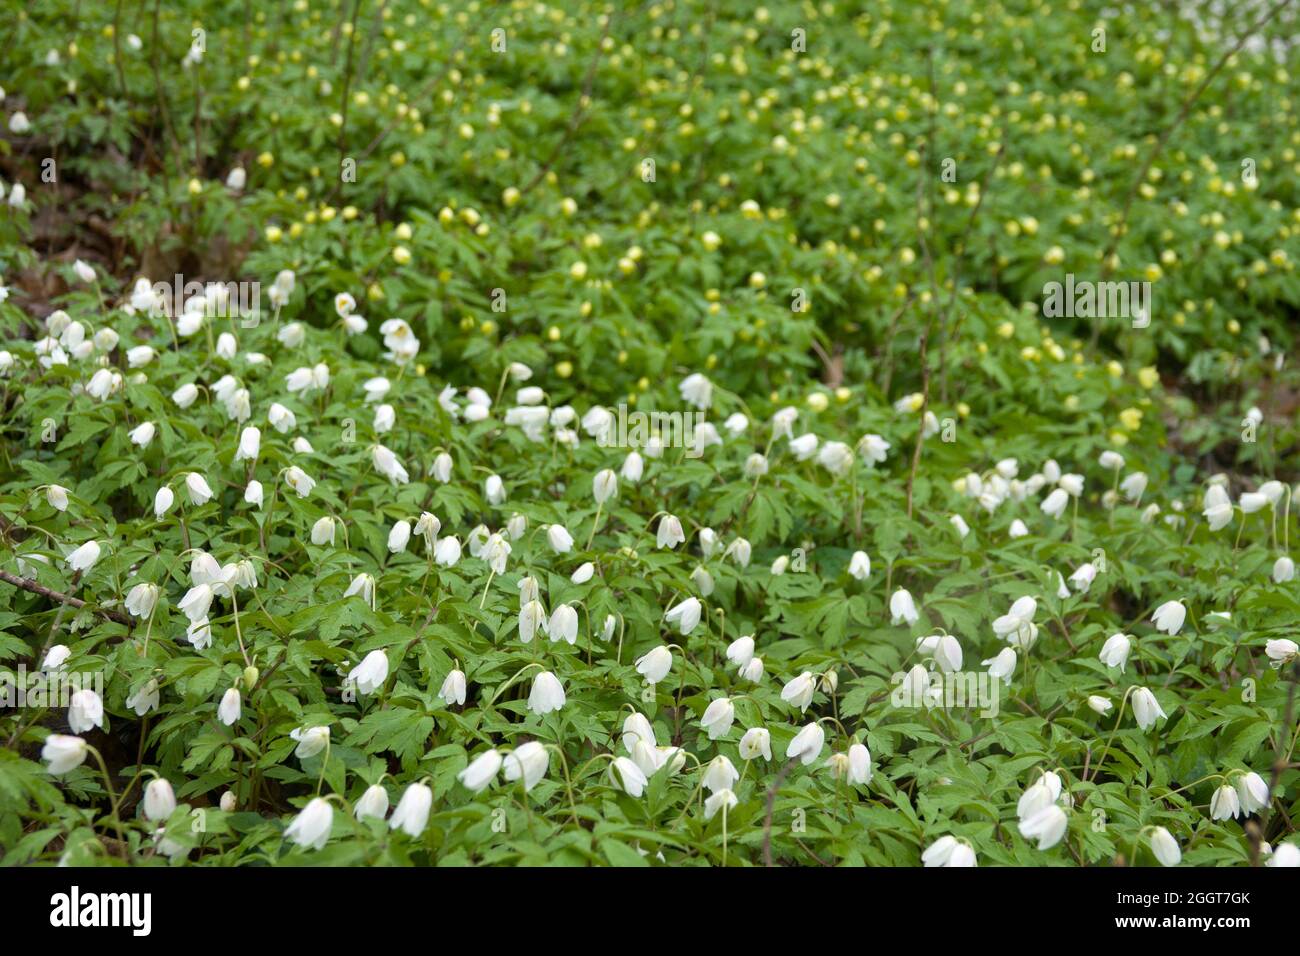 Early bloomers (primroses) of northern European forests. European wood anemone (Anemone nemorosa) and Yellow wood anemone (Anemone ranunculoides) in p Stock Photo